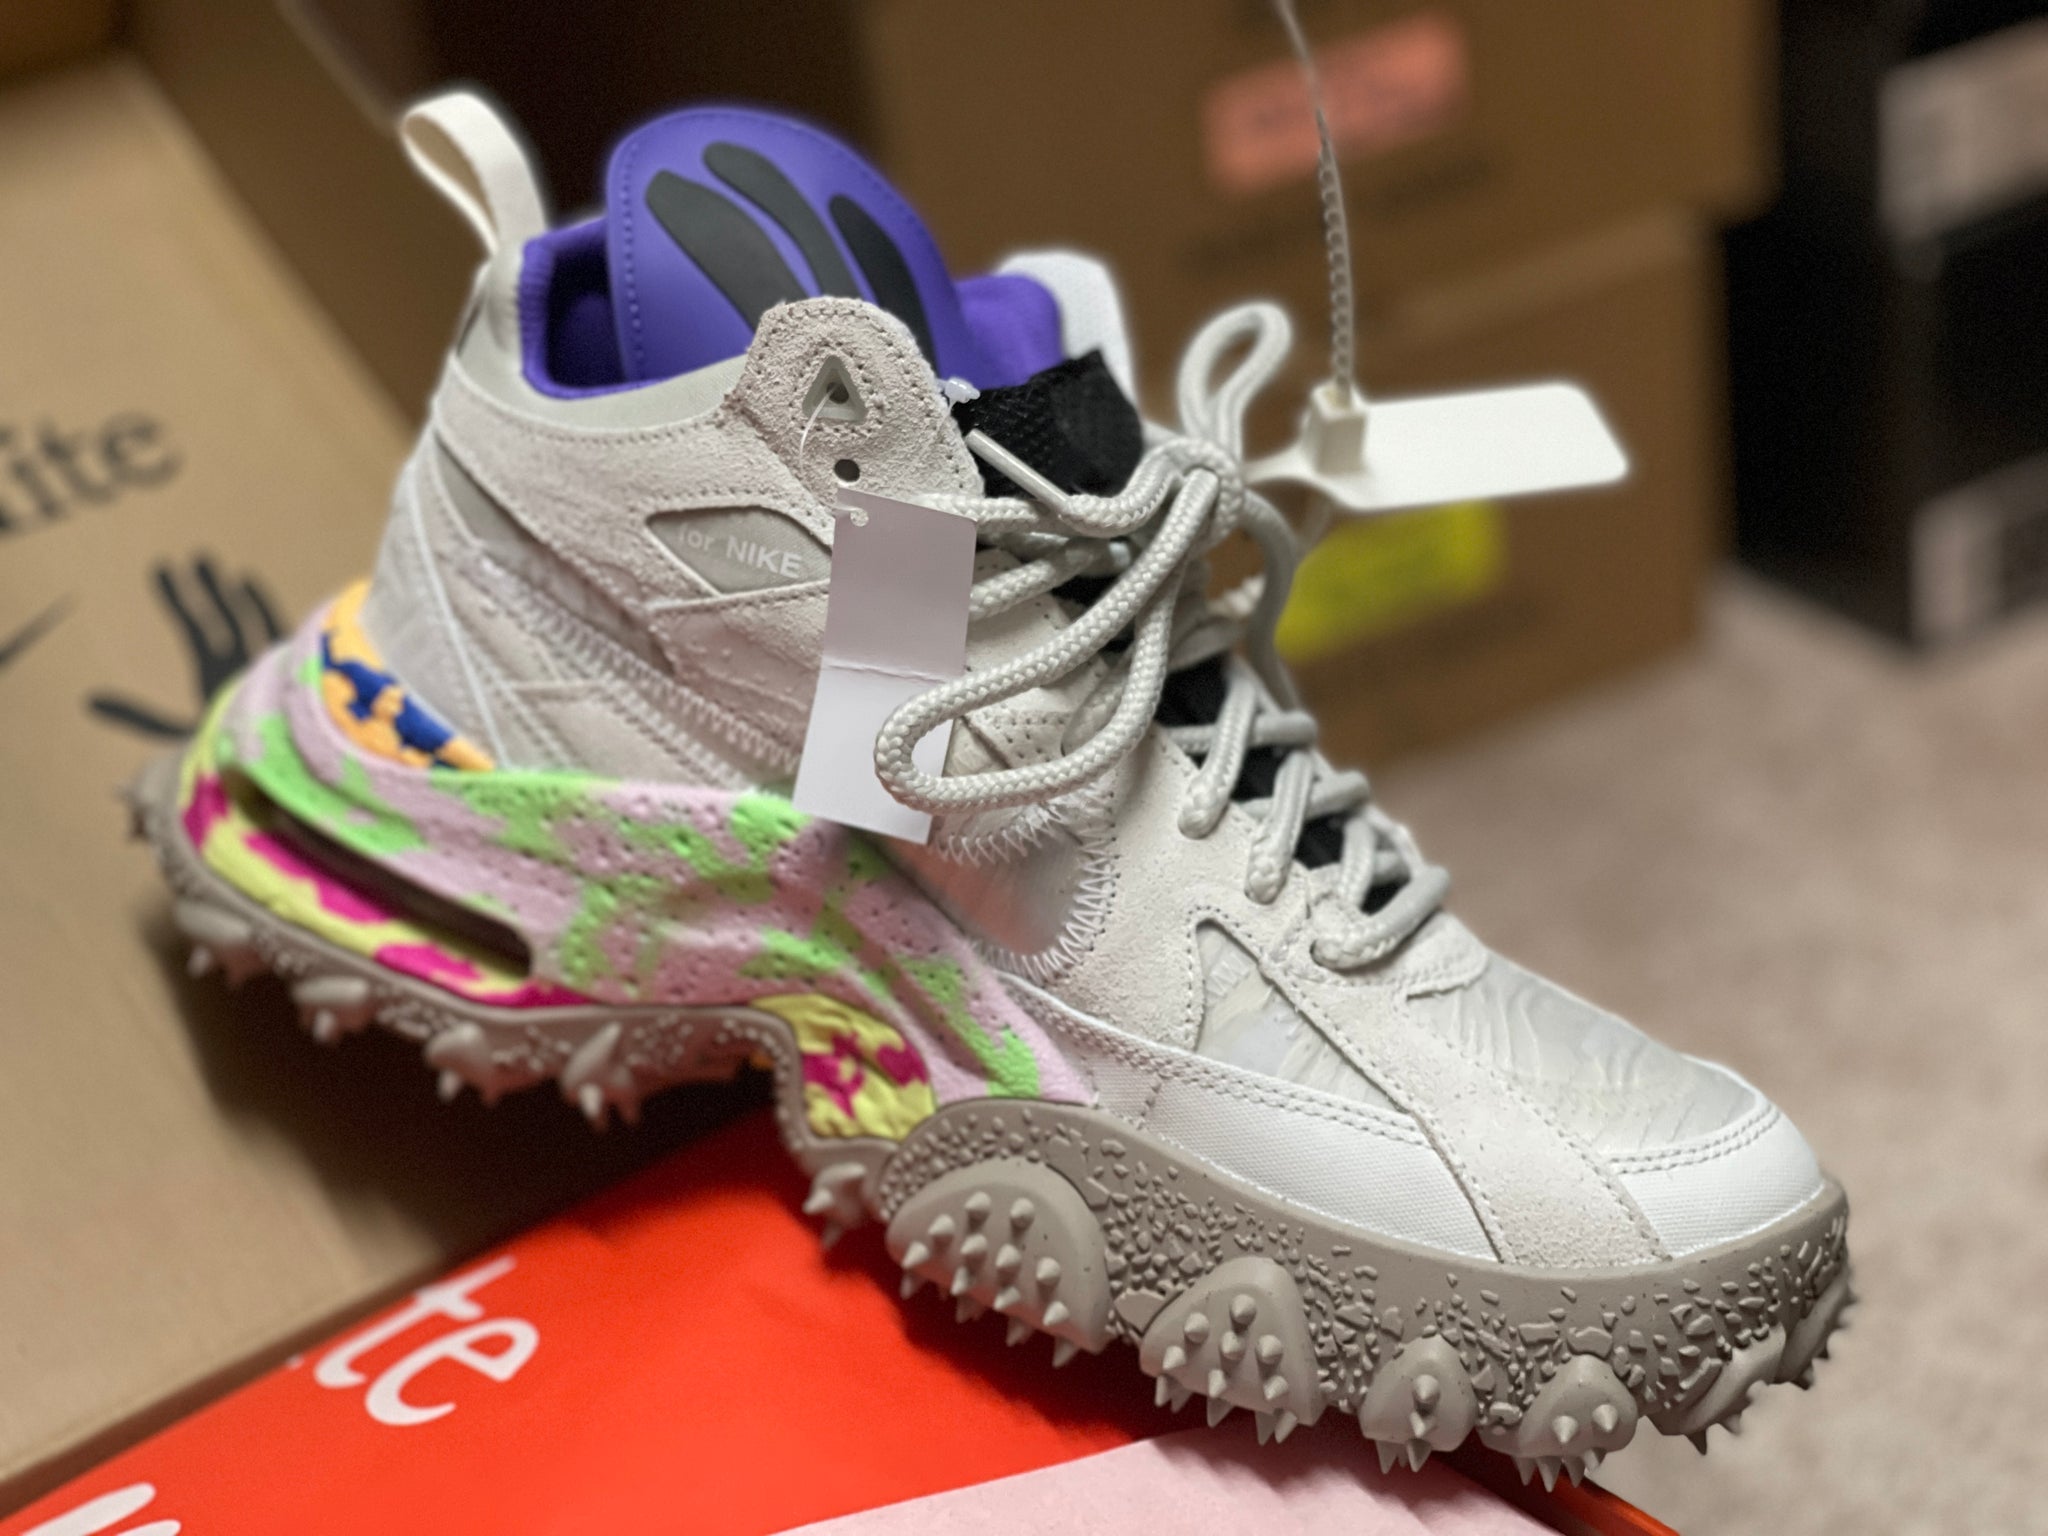 Off-White x NIKE • 👟 Size 9.5 • Air Terra Forma 2022, by Virgil Abloh. -  360° LOVE ™